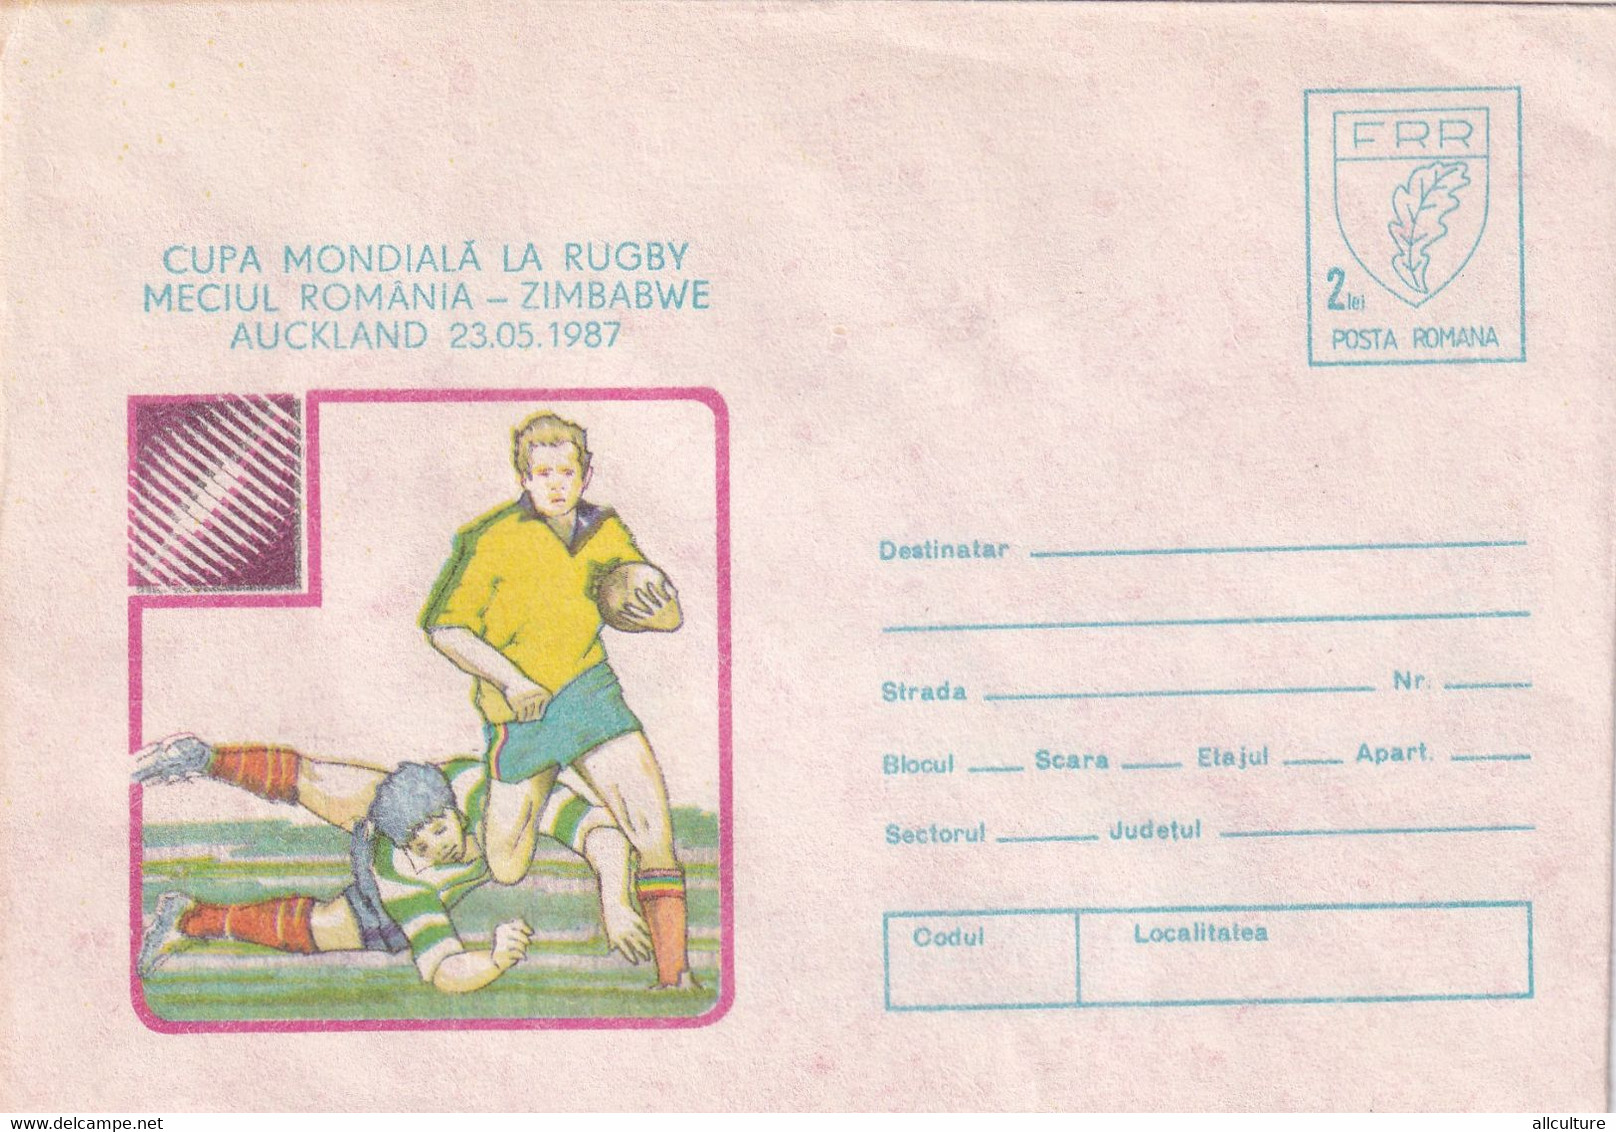 A8364- WORLD CUP OF RUGBY, ROMANIA - ZIMBABWE MATCH 1987, ROMANIA  COVER STATIONERY UNUSED - Rugby